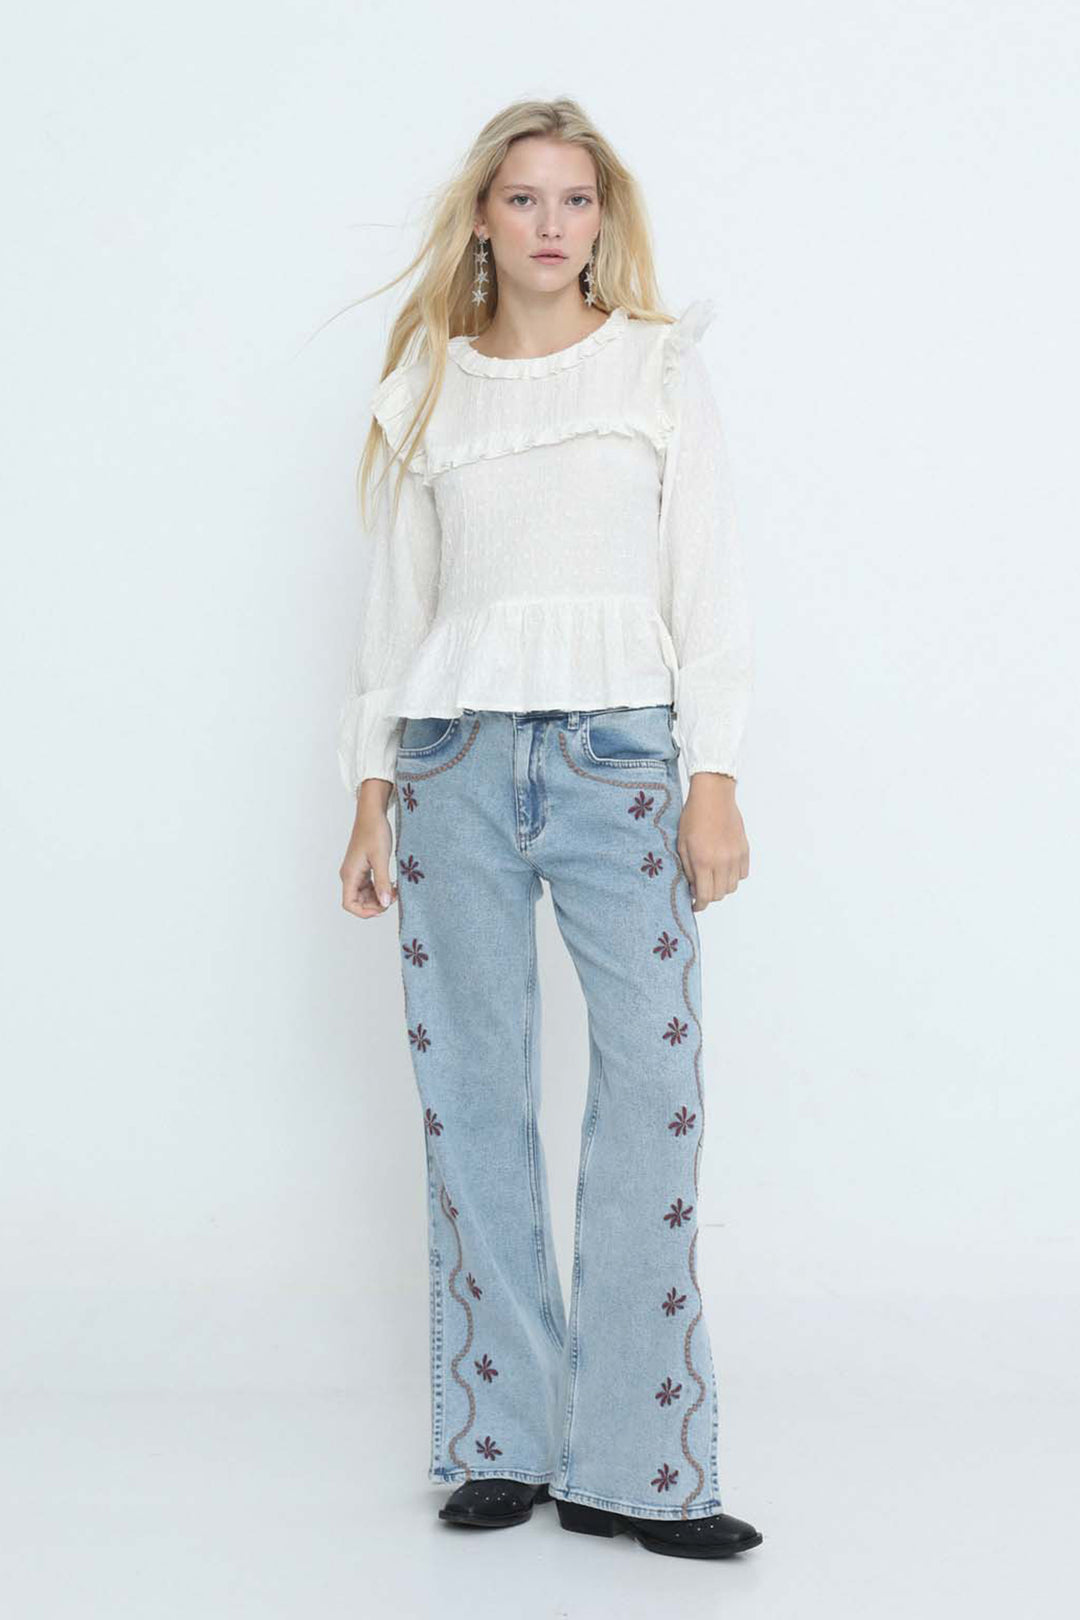 Embroidered Jeans